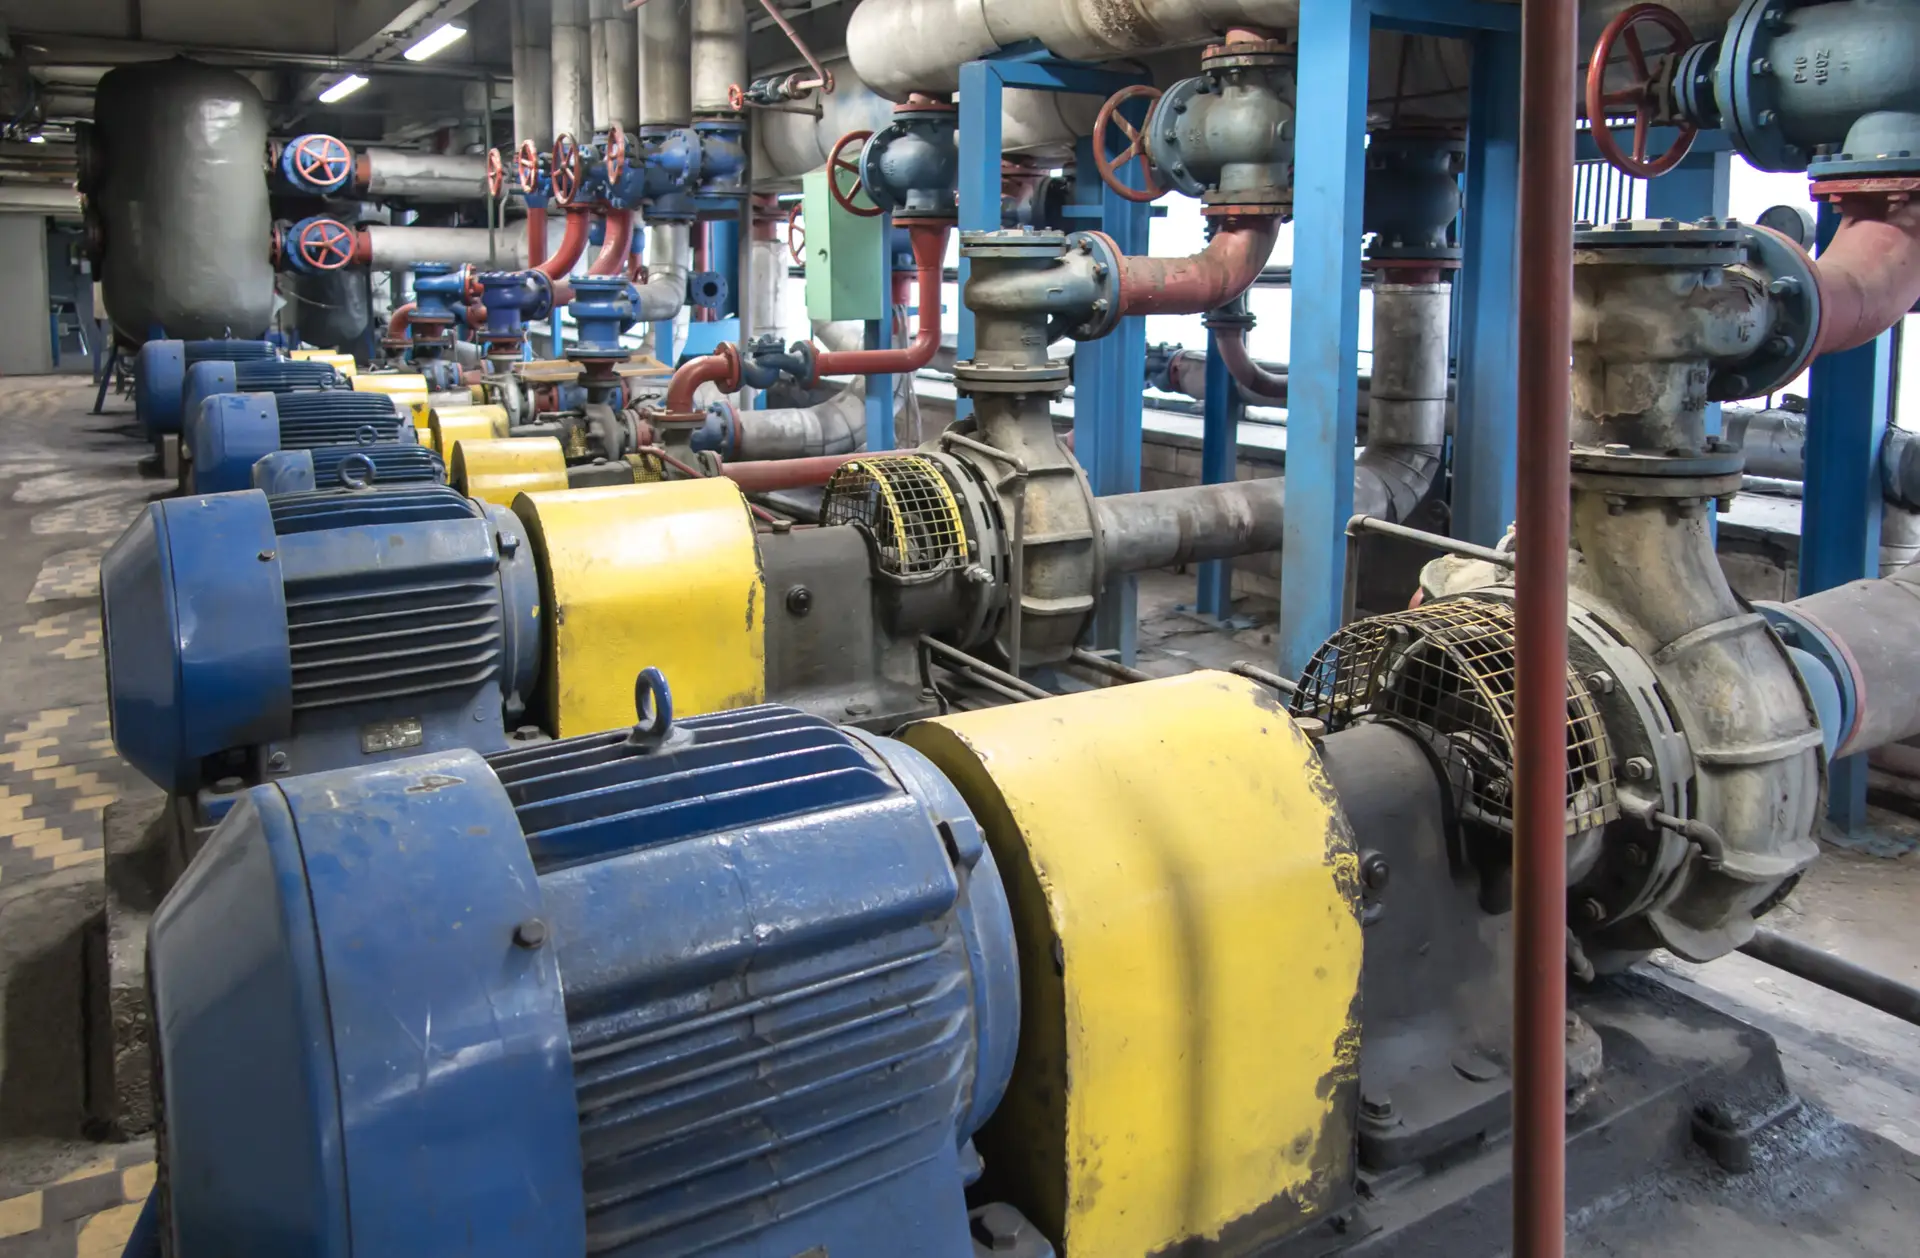 Rotating machines such as pumps installed inside a factory environment